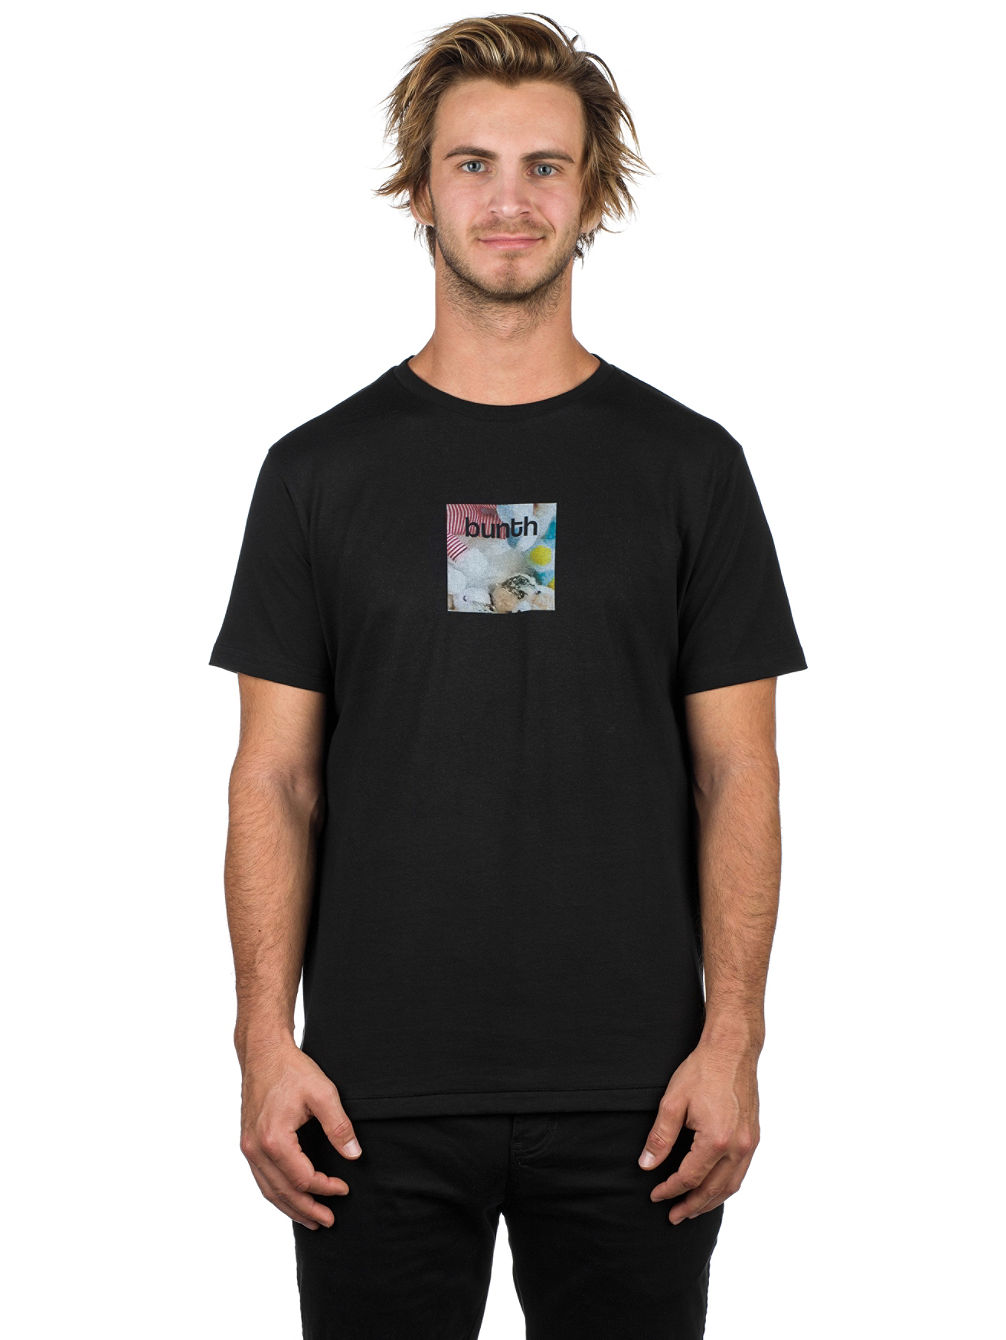 Colorbox T-Shirt